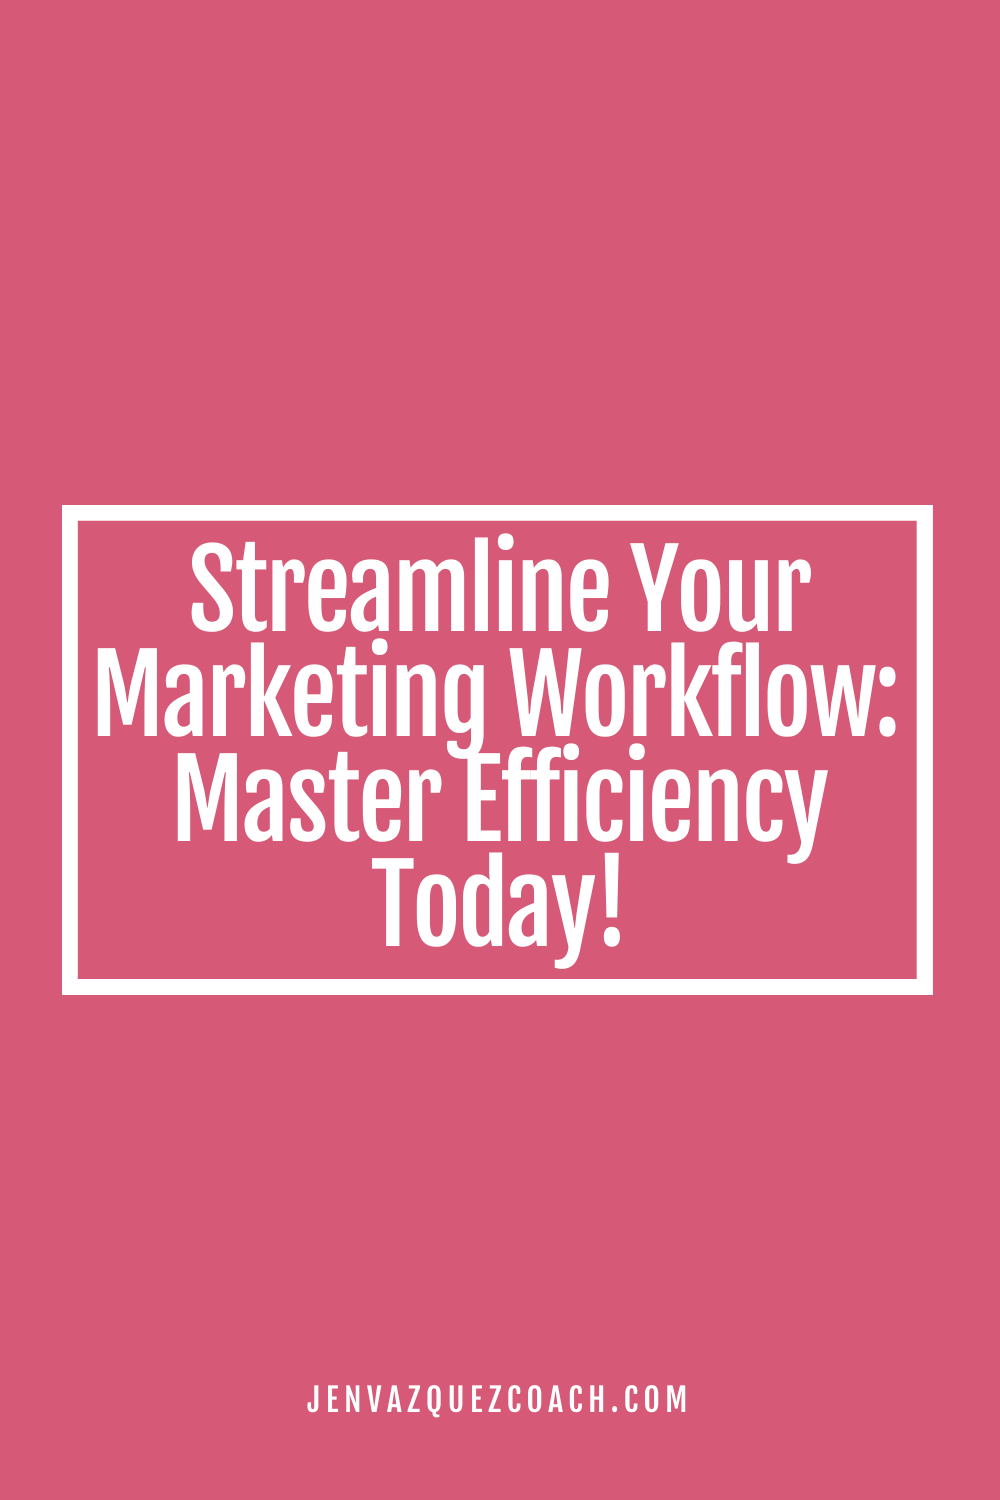 Overwhelmed by marketing tasks? Learn how to streamline your workflow with practical tips on mapping out processes, automating repetitive tasks, and enhancing team collaboration. Boost efficiency, reduce stress, and achieve better results in your marketing efforts.